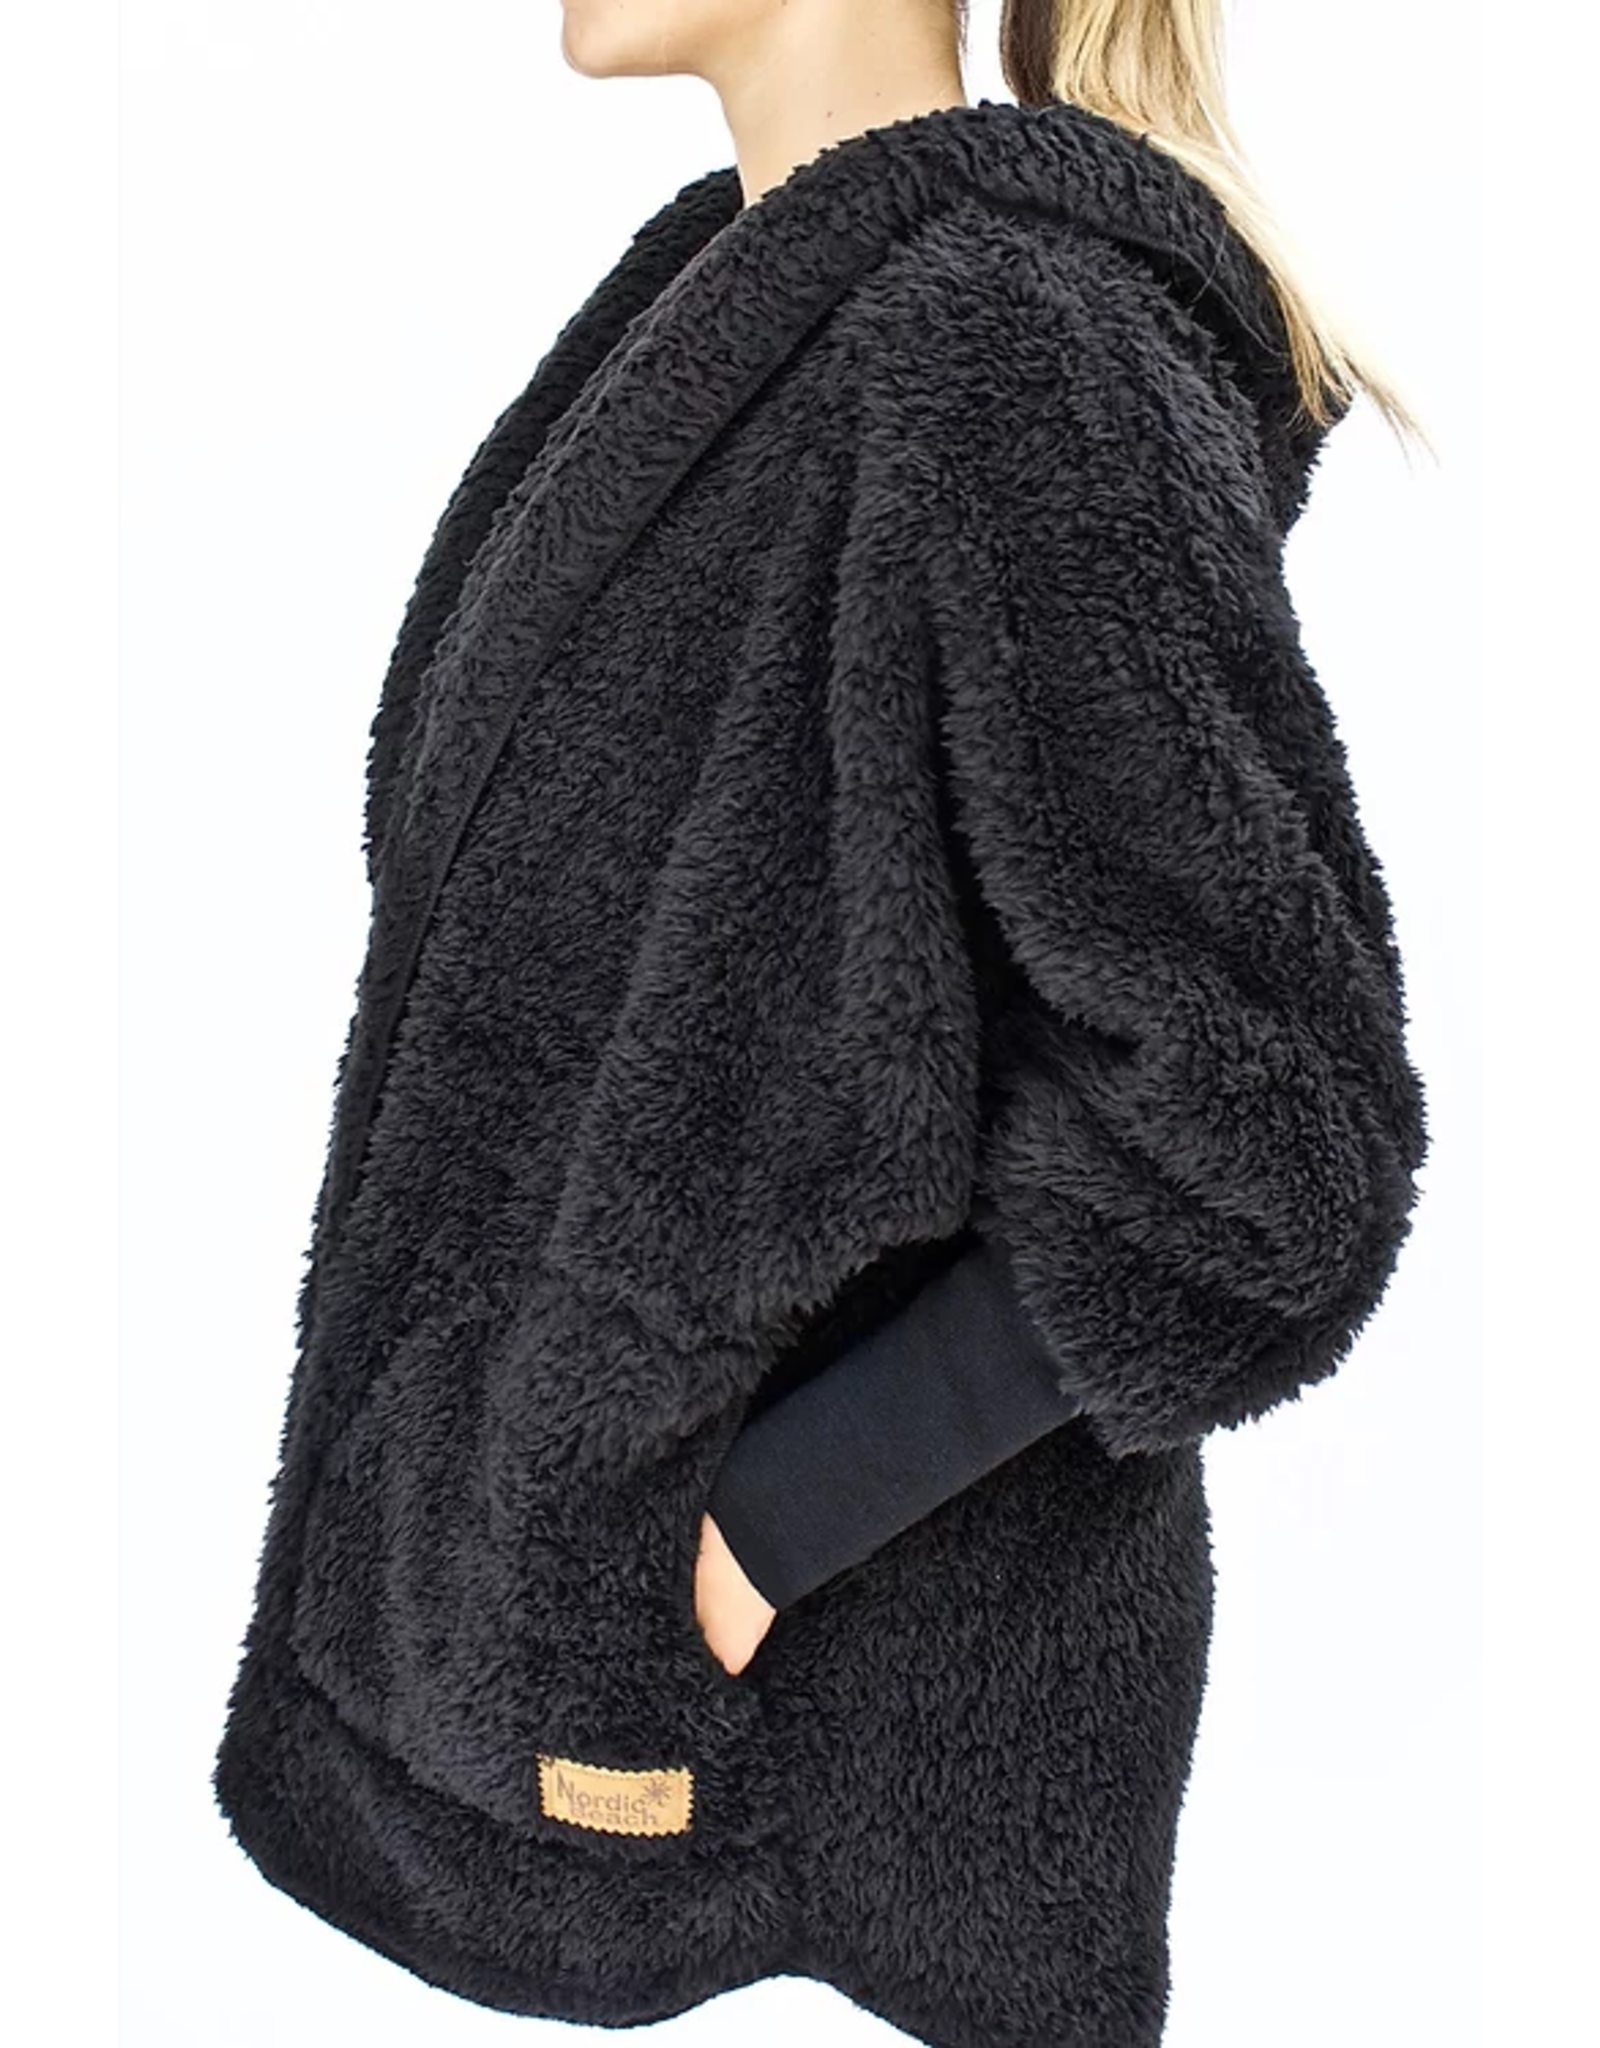 Nordic Beach Nordic Beach NB-BL Cozy Hooded Wrap One Size  Black Licorice